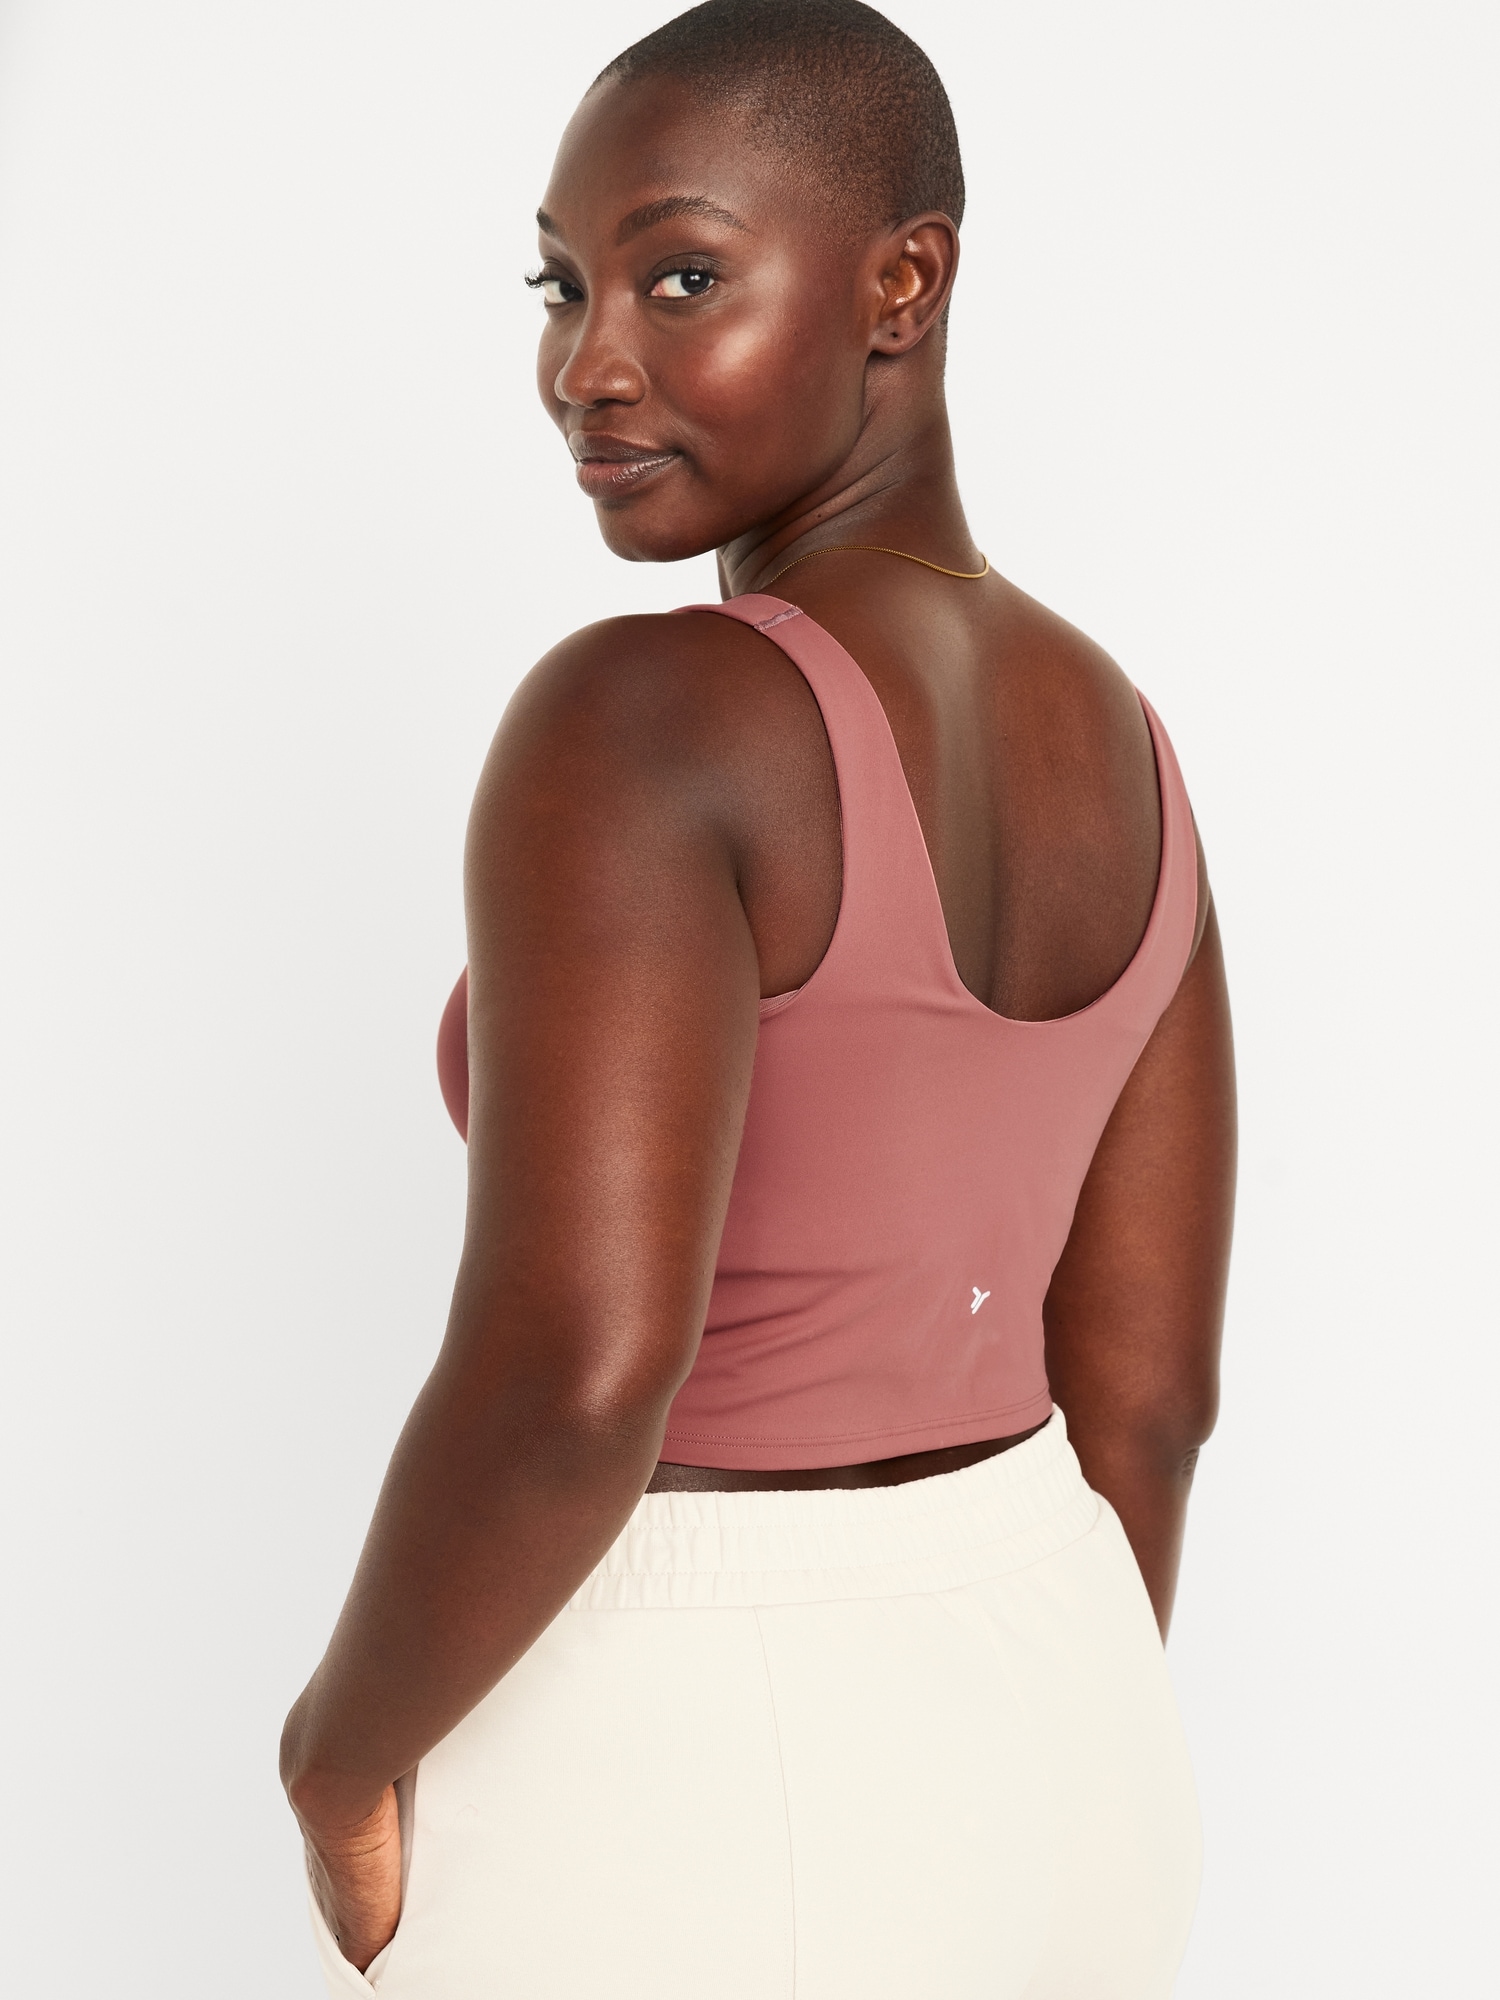 Lululemon shoppers are obsessed with this 'compressive' sports bra